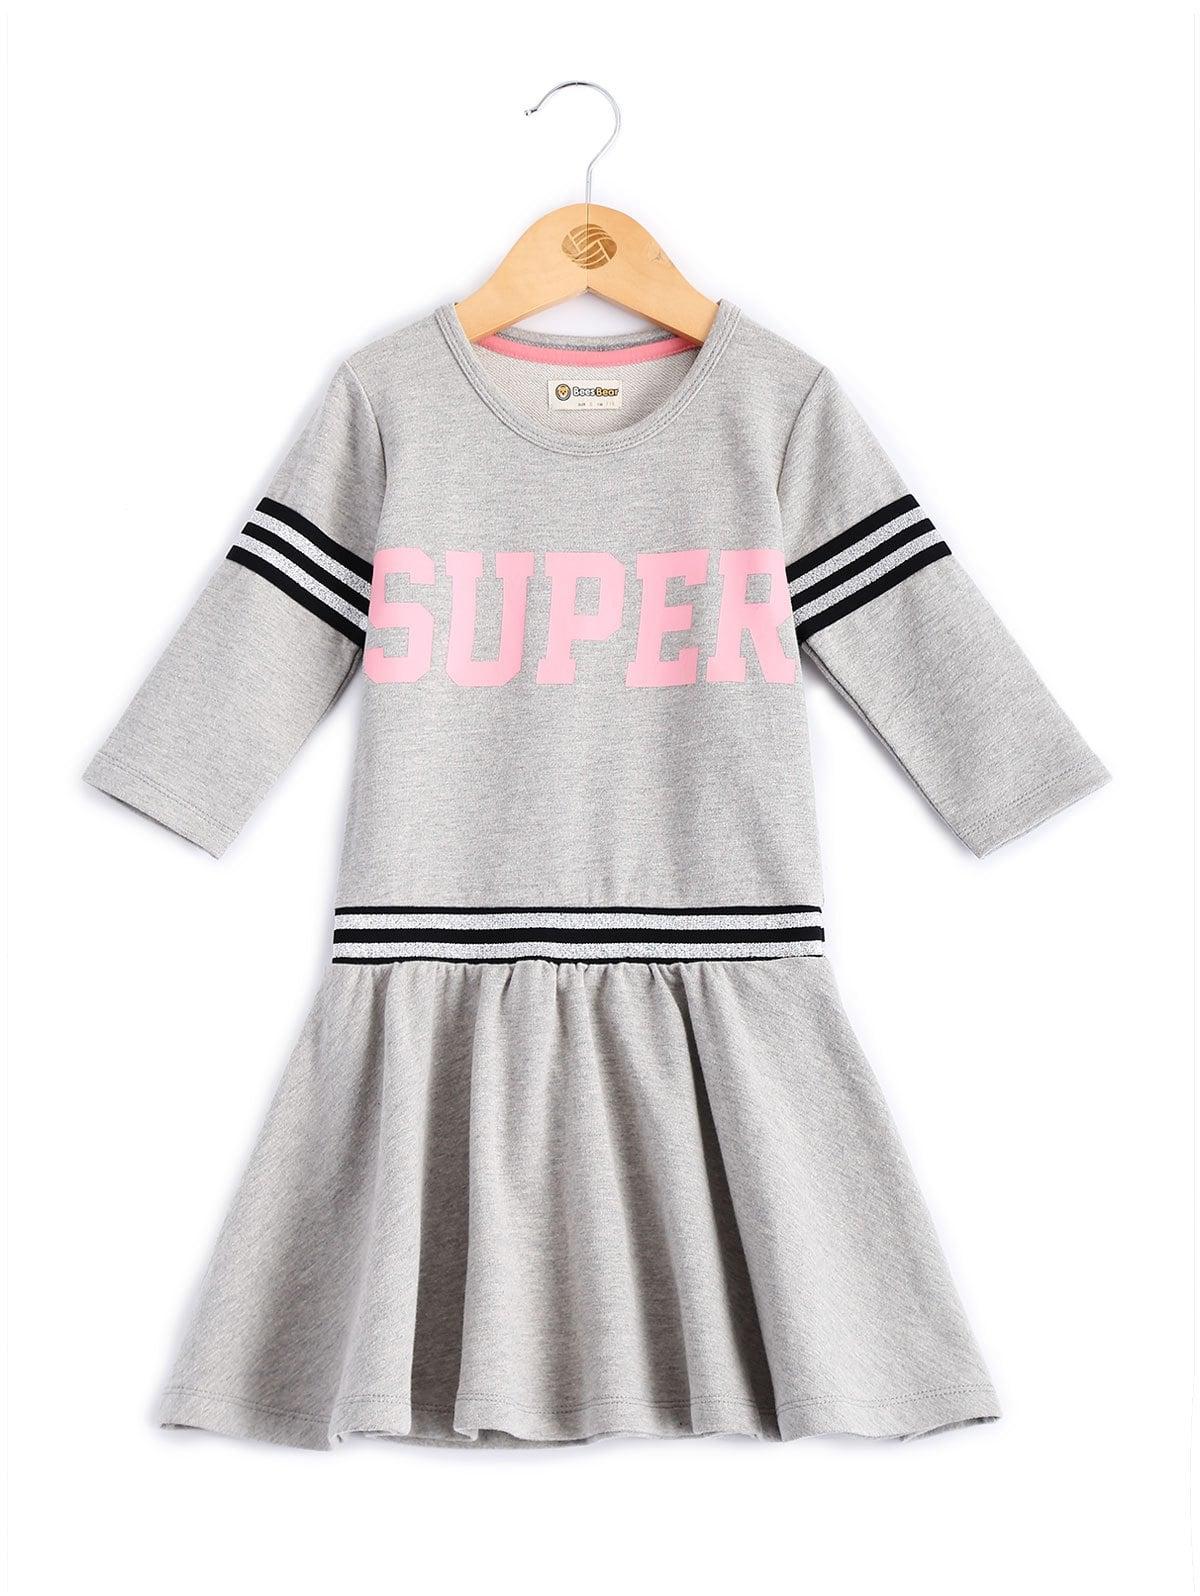 Six Letter Clothing Logo - Casual Attire. Light Gray CHILD 6 Letter Print Kids Two Piece Dress